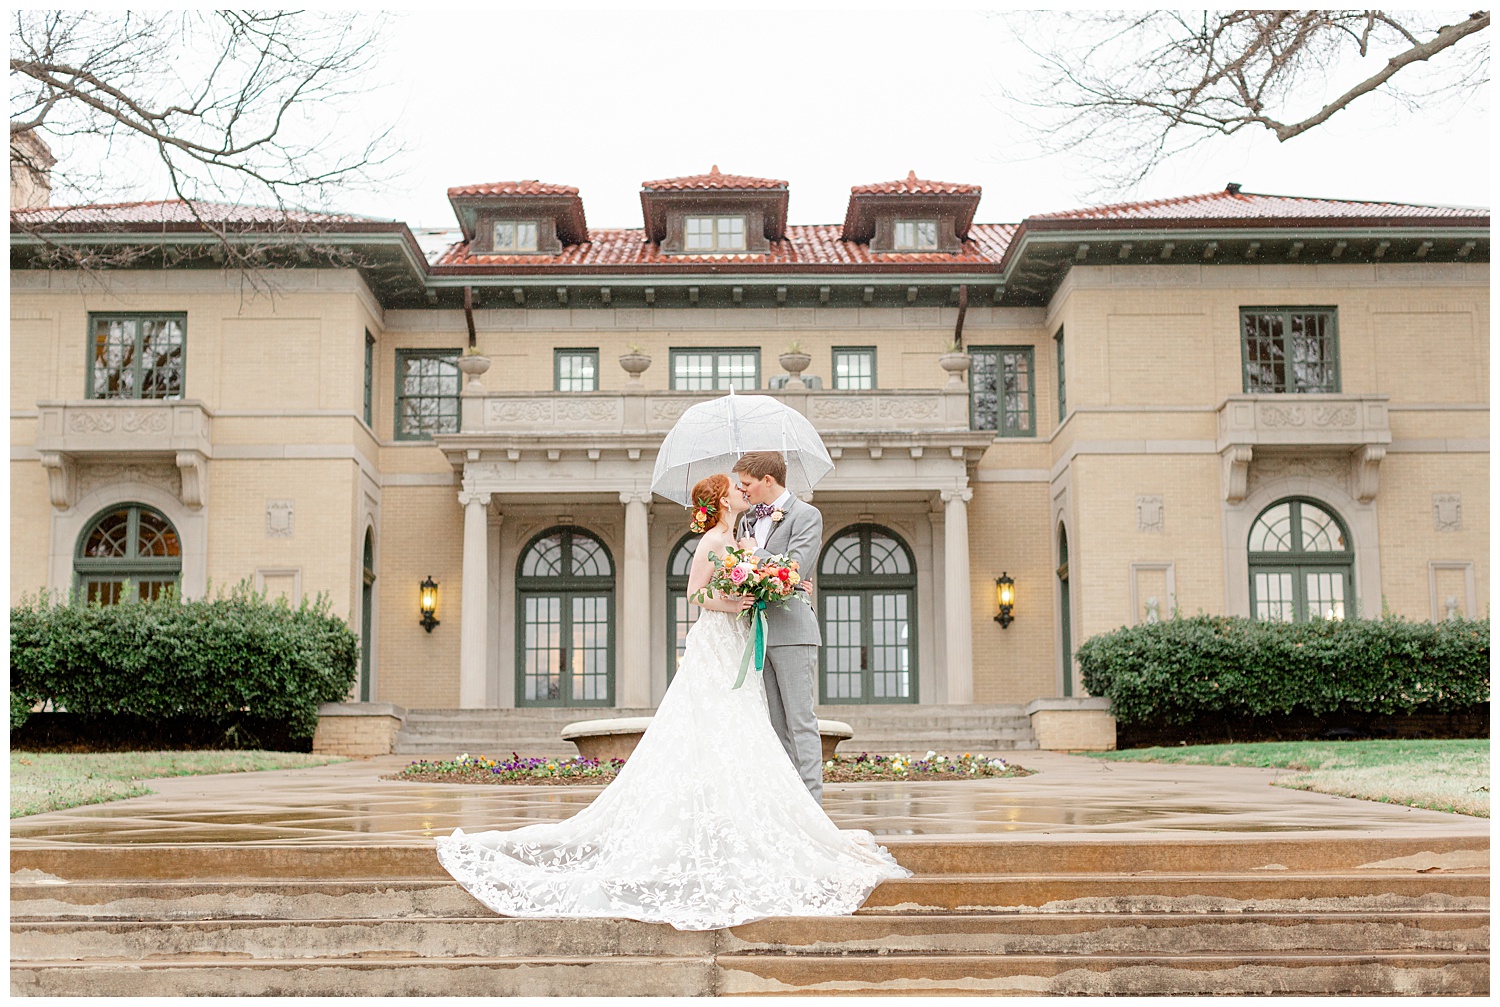 Bride and groom standing under an umbrella in the rain Mansion at woodward park during a spring wedding.